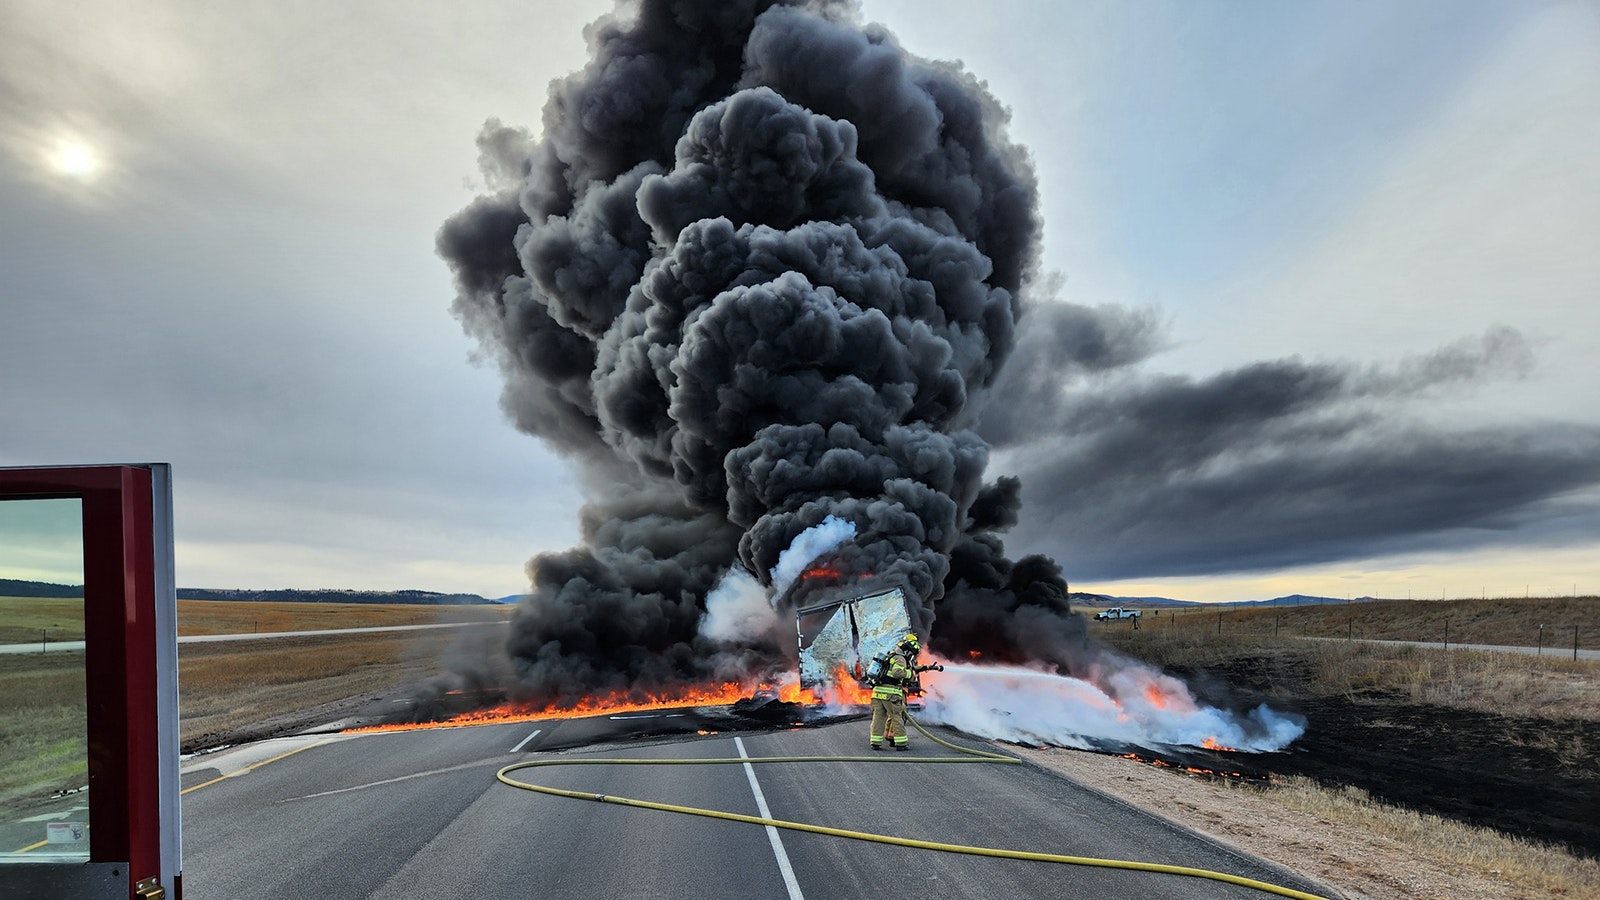 Fire crews from Crook County, Wyoming, and Spearfish, South Dakota, worked together to put out this semitrailer fire on Interstate 90 near Beulah, Wyoming, close to the South Dakota border.